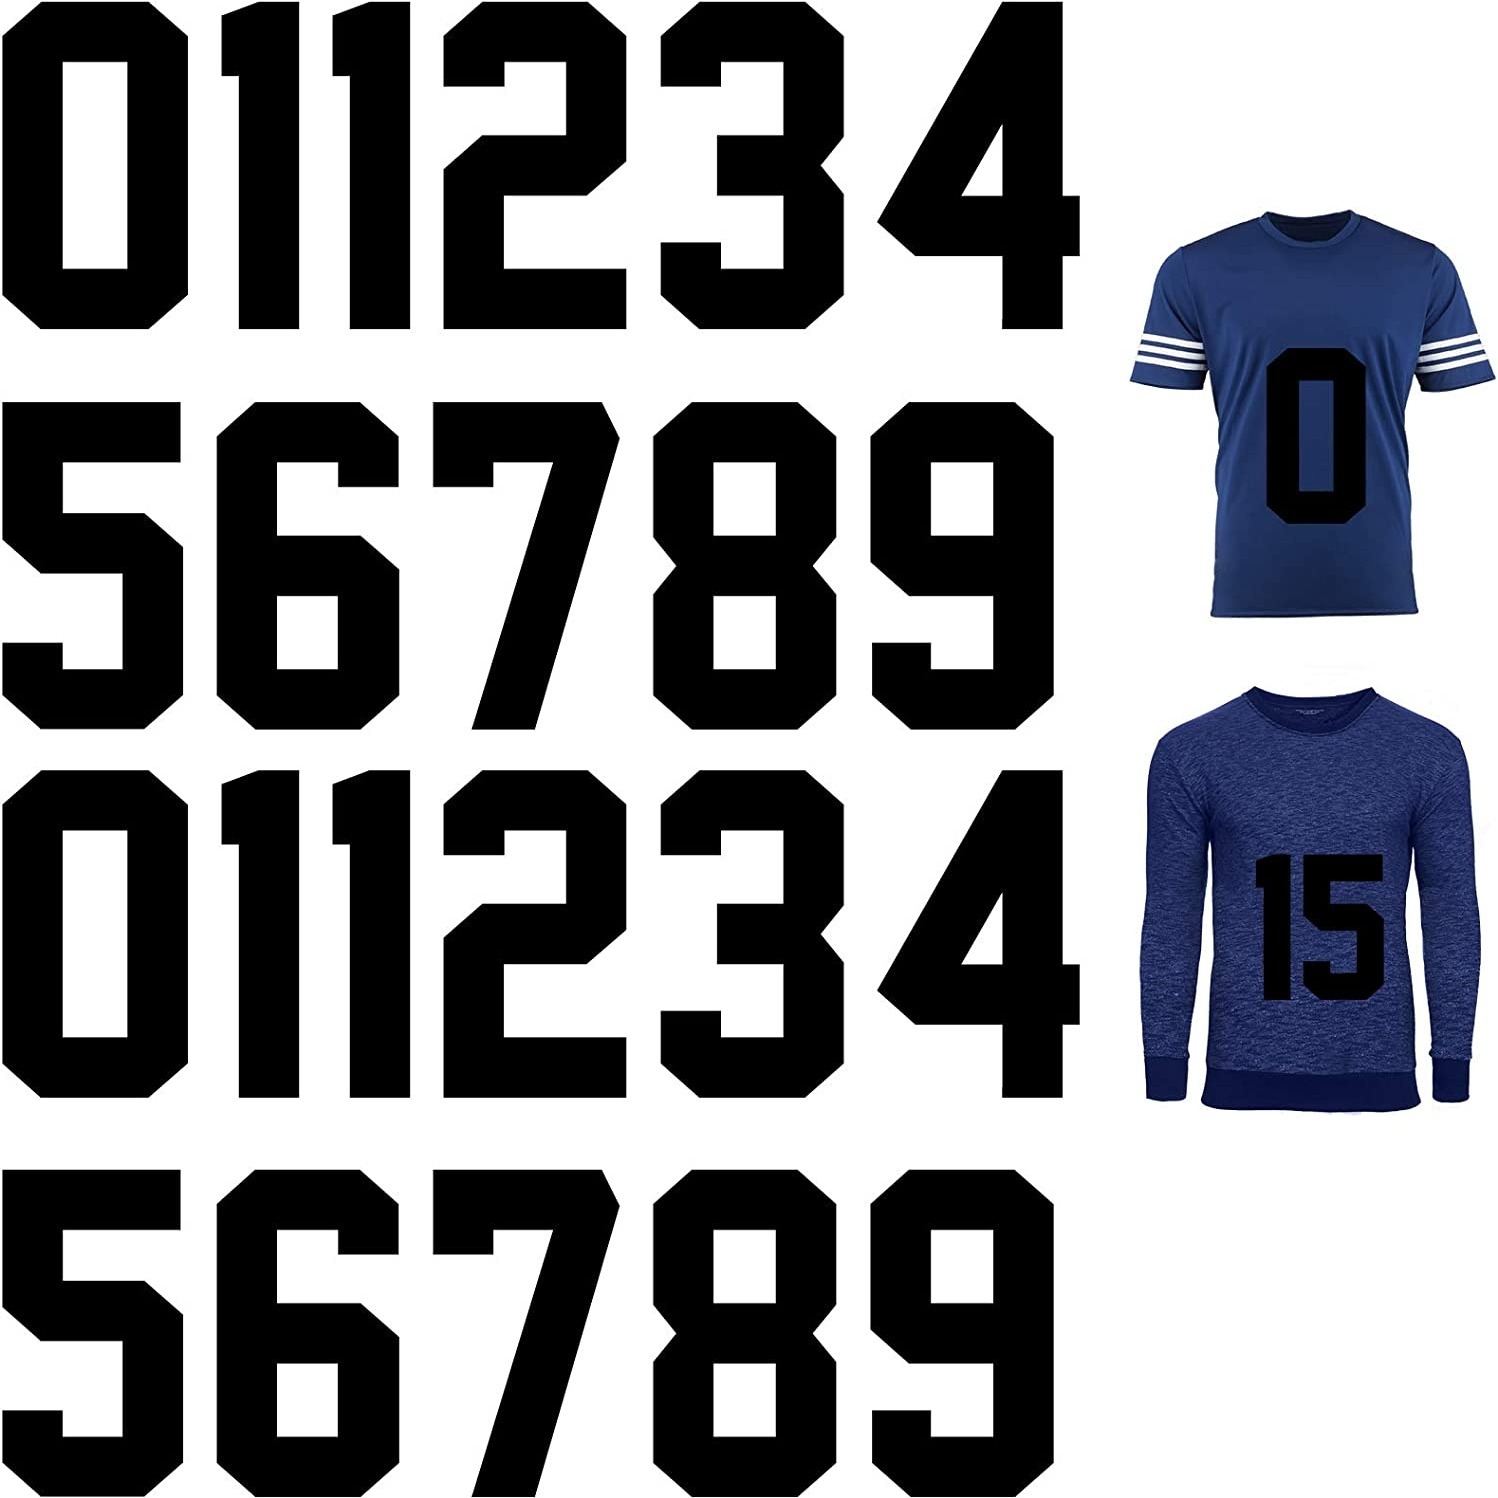 Shirt Number png images